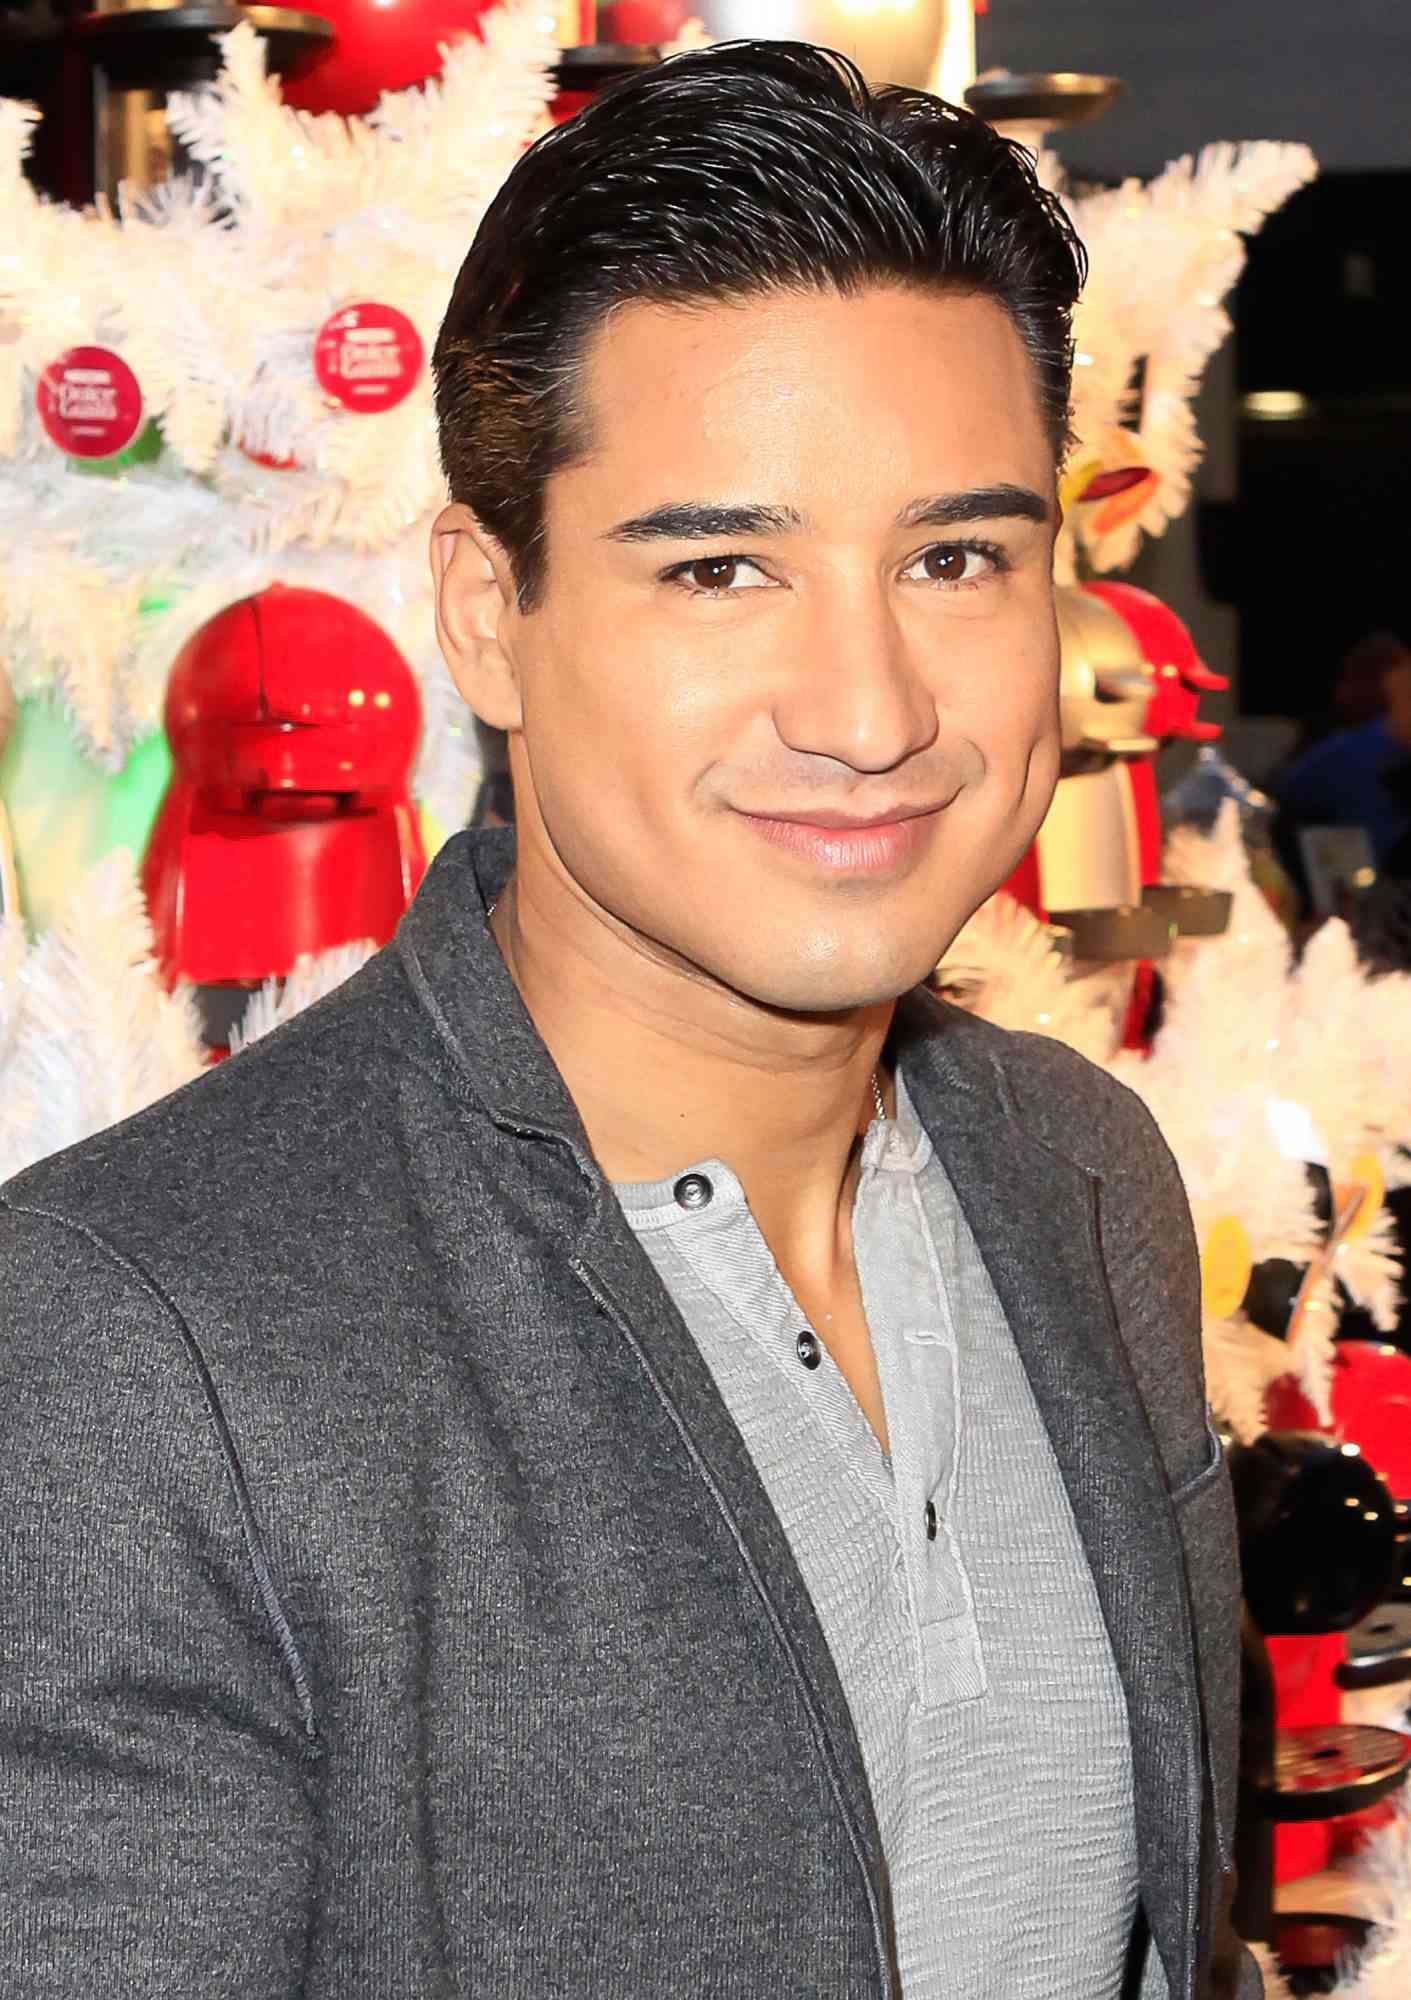 Mario Lopez Joins Nescafe Dolce Gusto To Host Holiday Pop-Up